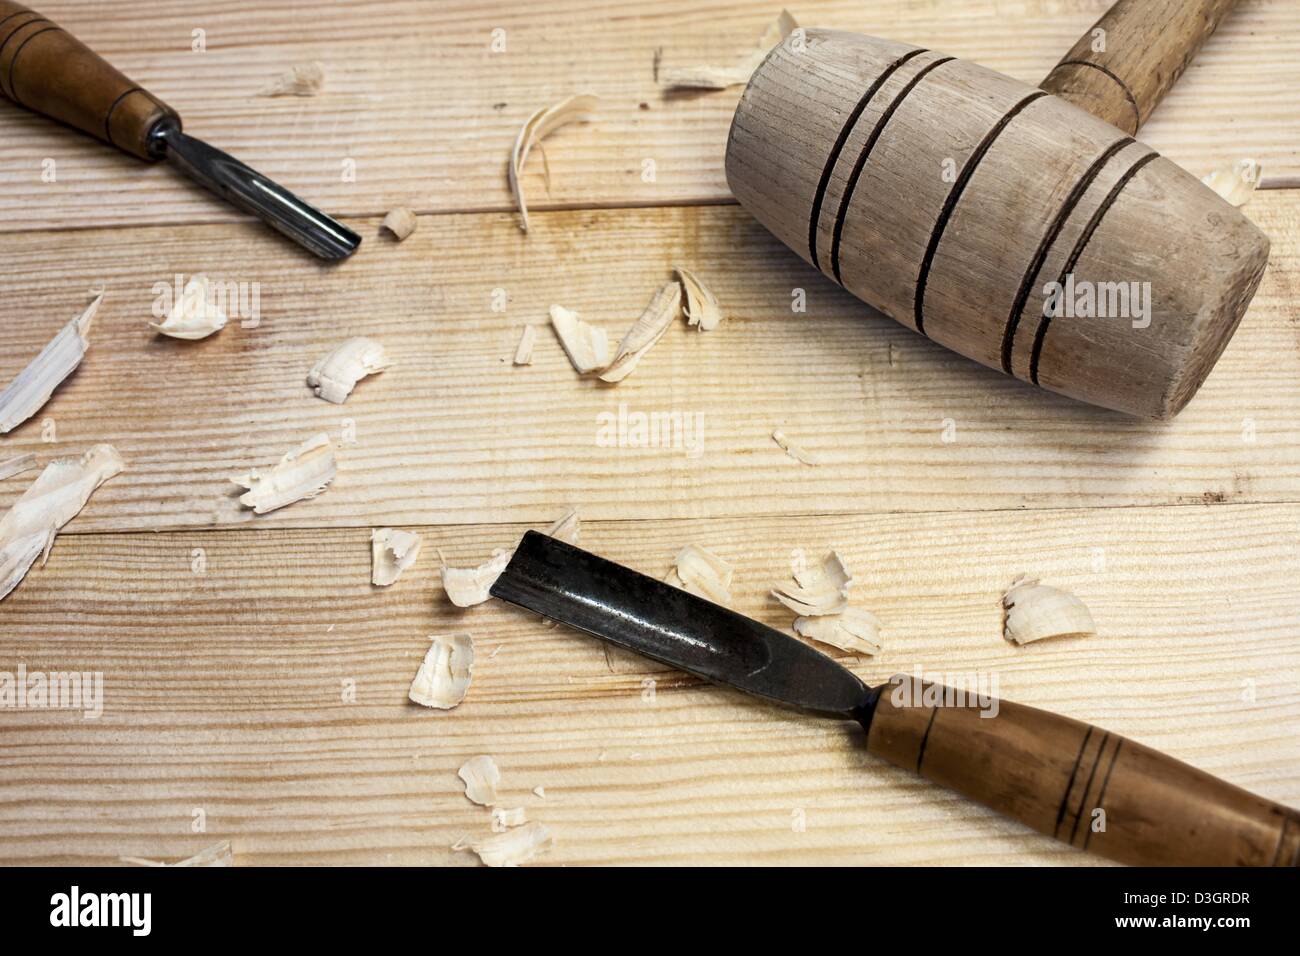 joiner tools,hammer and chisel on wood table background Stock Photo